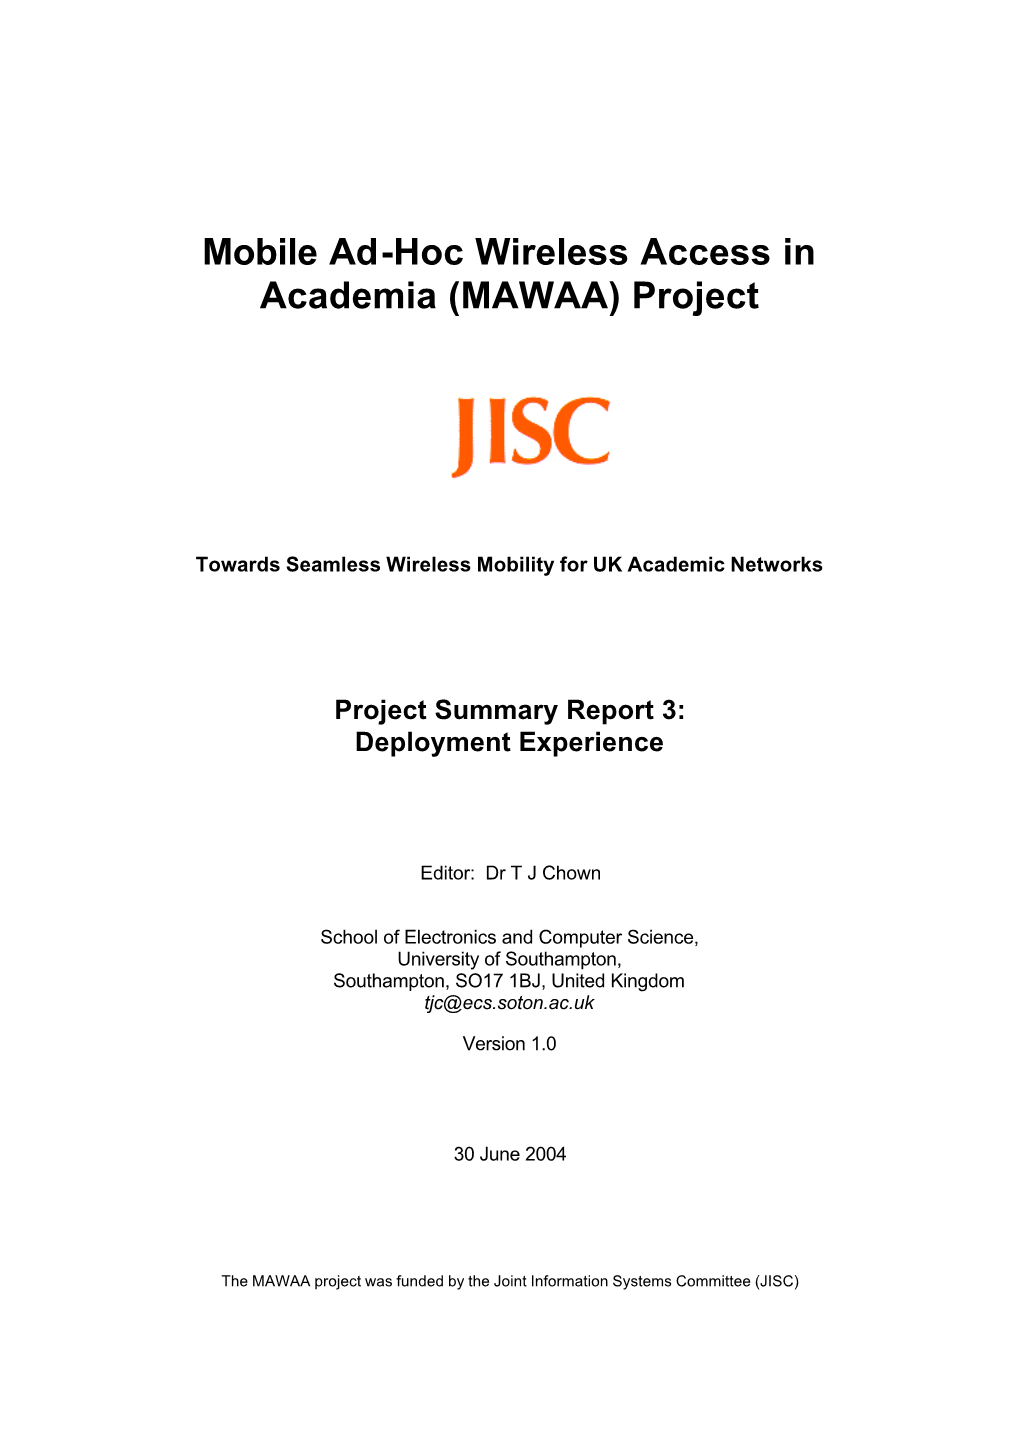 Mobile Ad-Hoc Wireless Access in Academia (MAWAA) Project